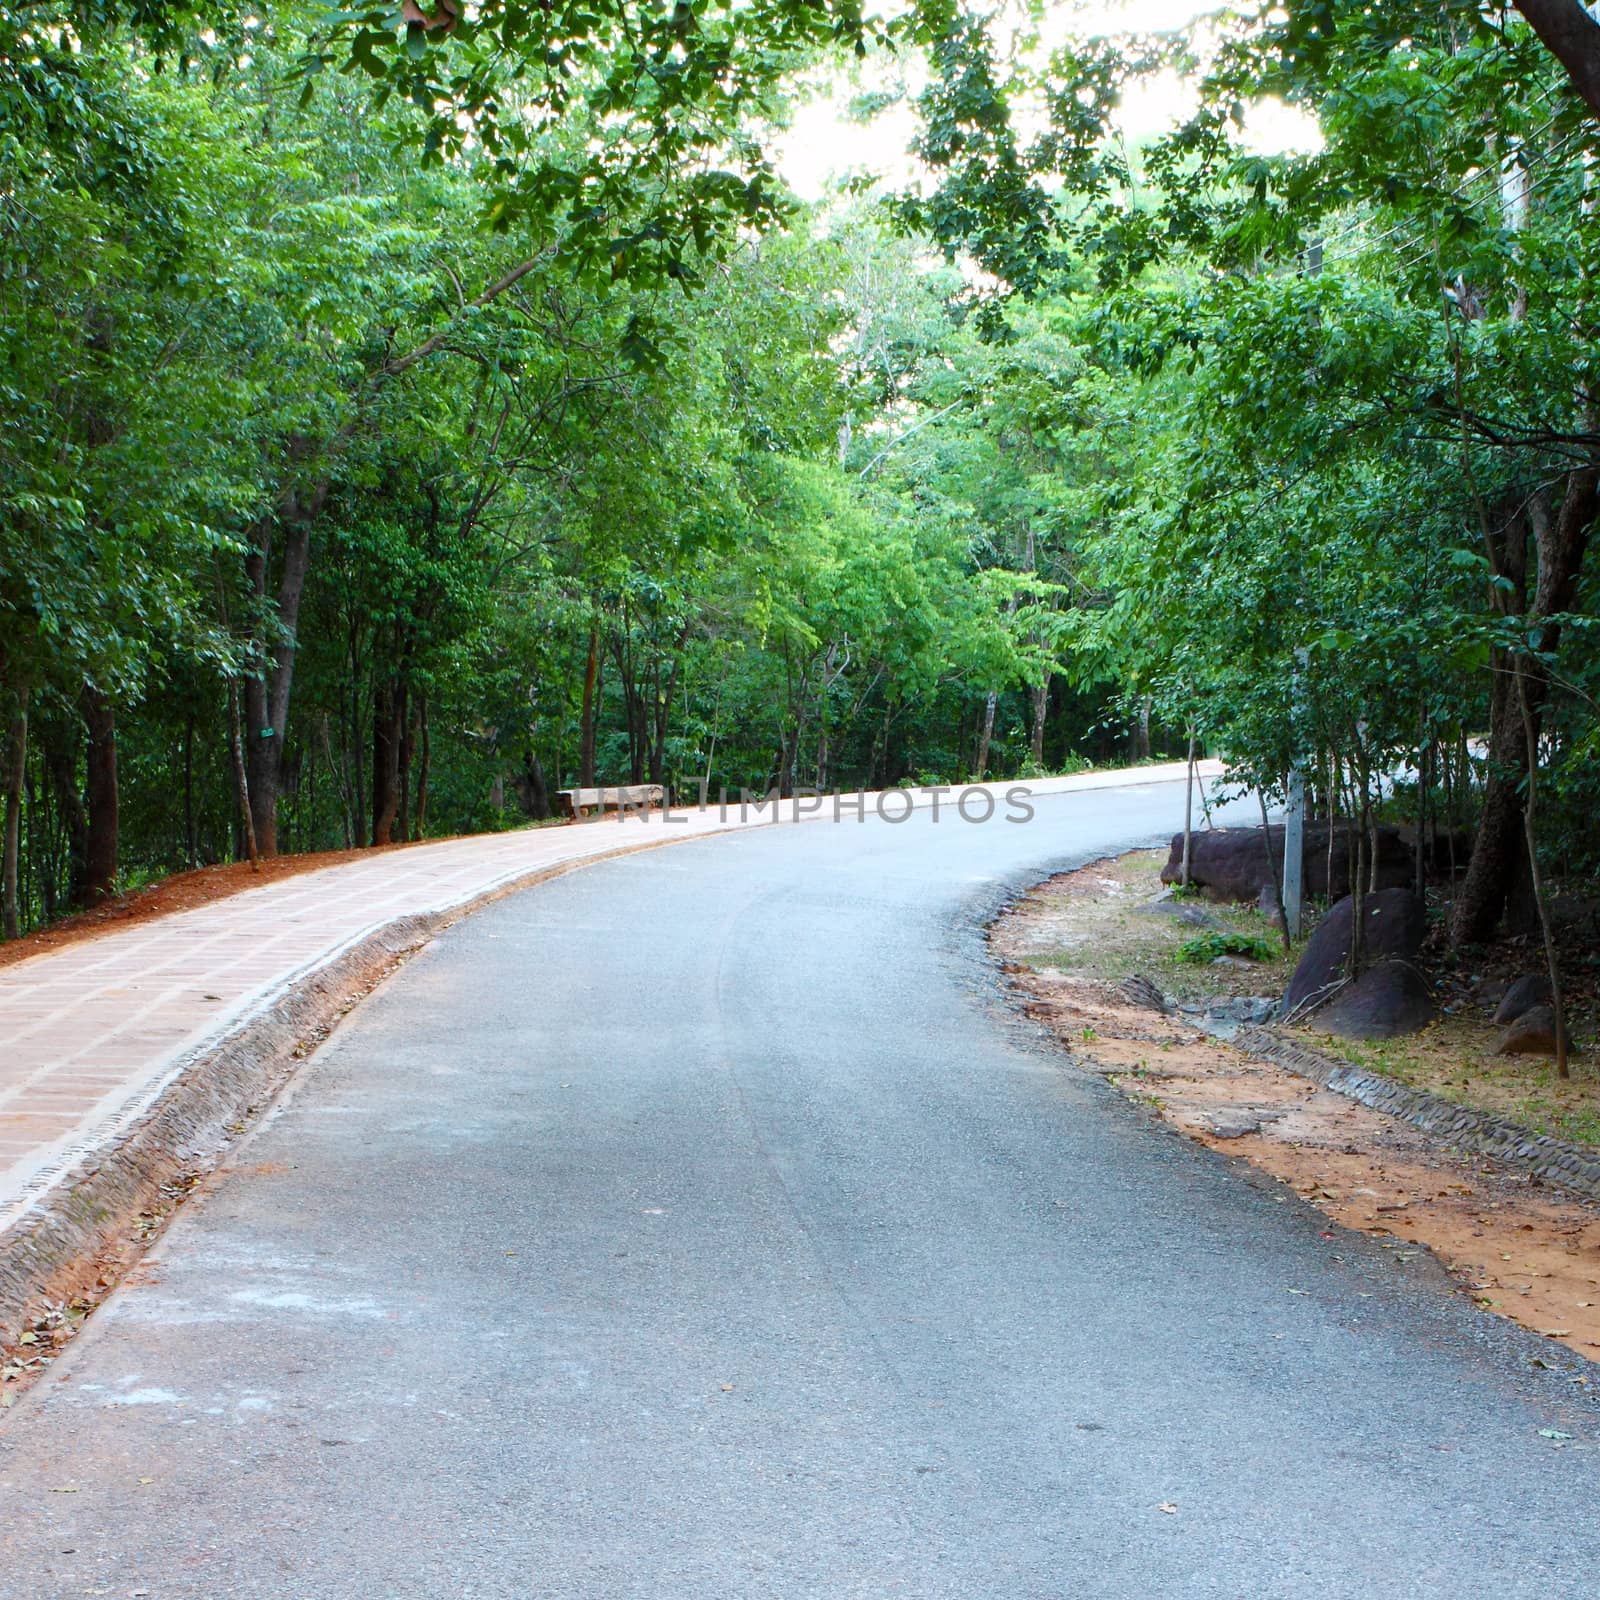 country curved road with trees on both sides